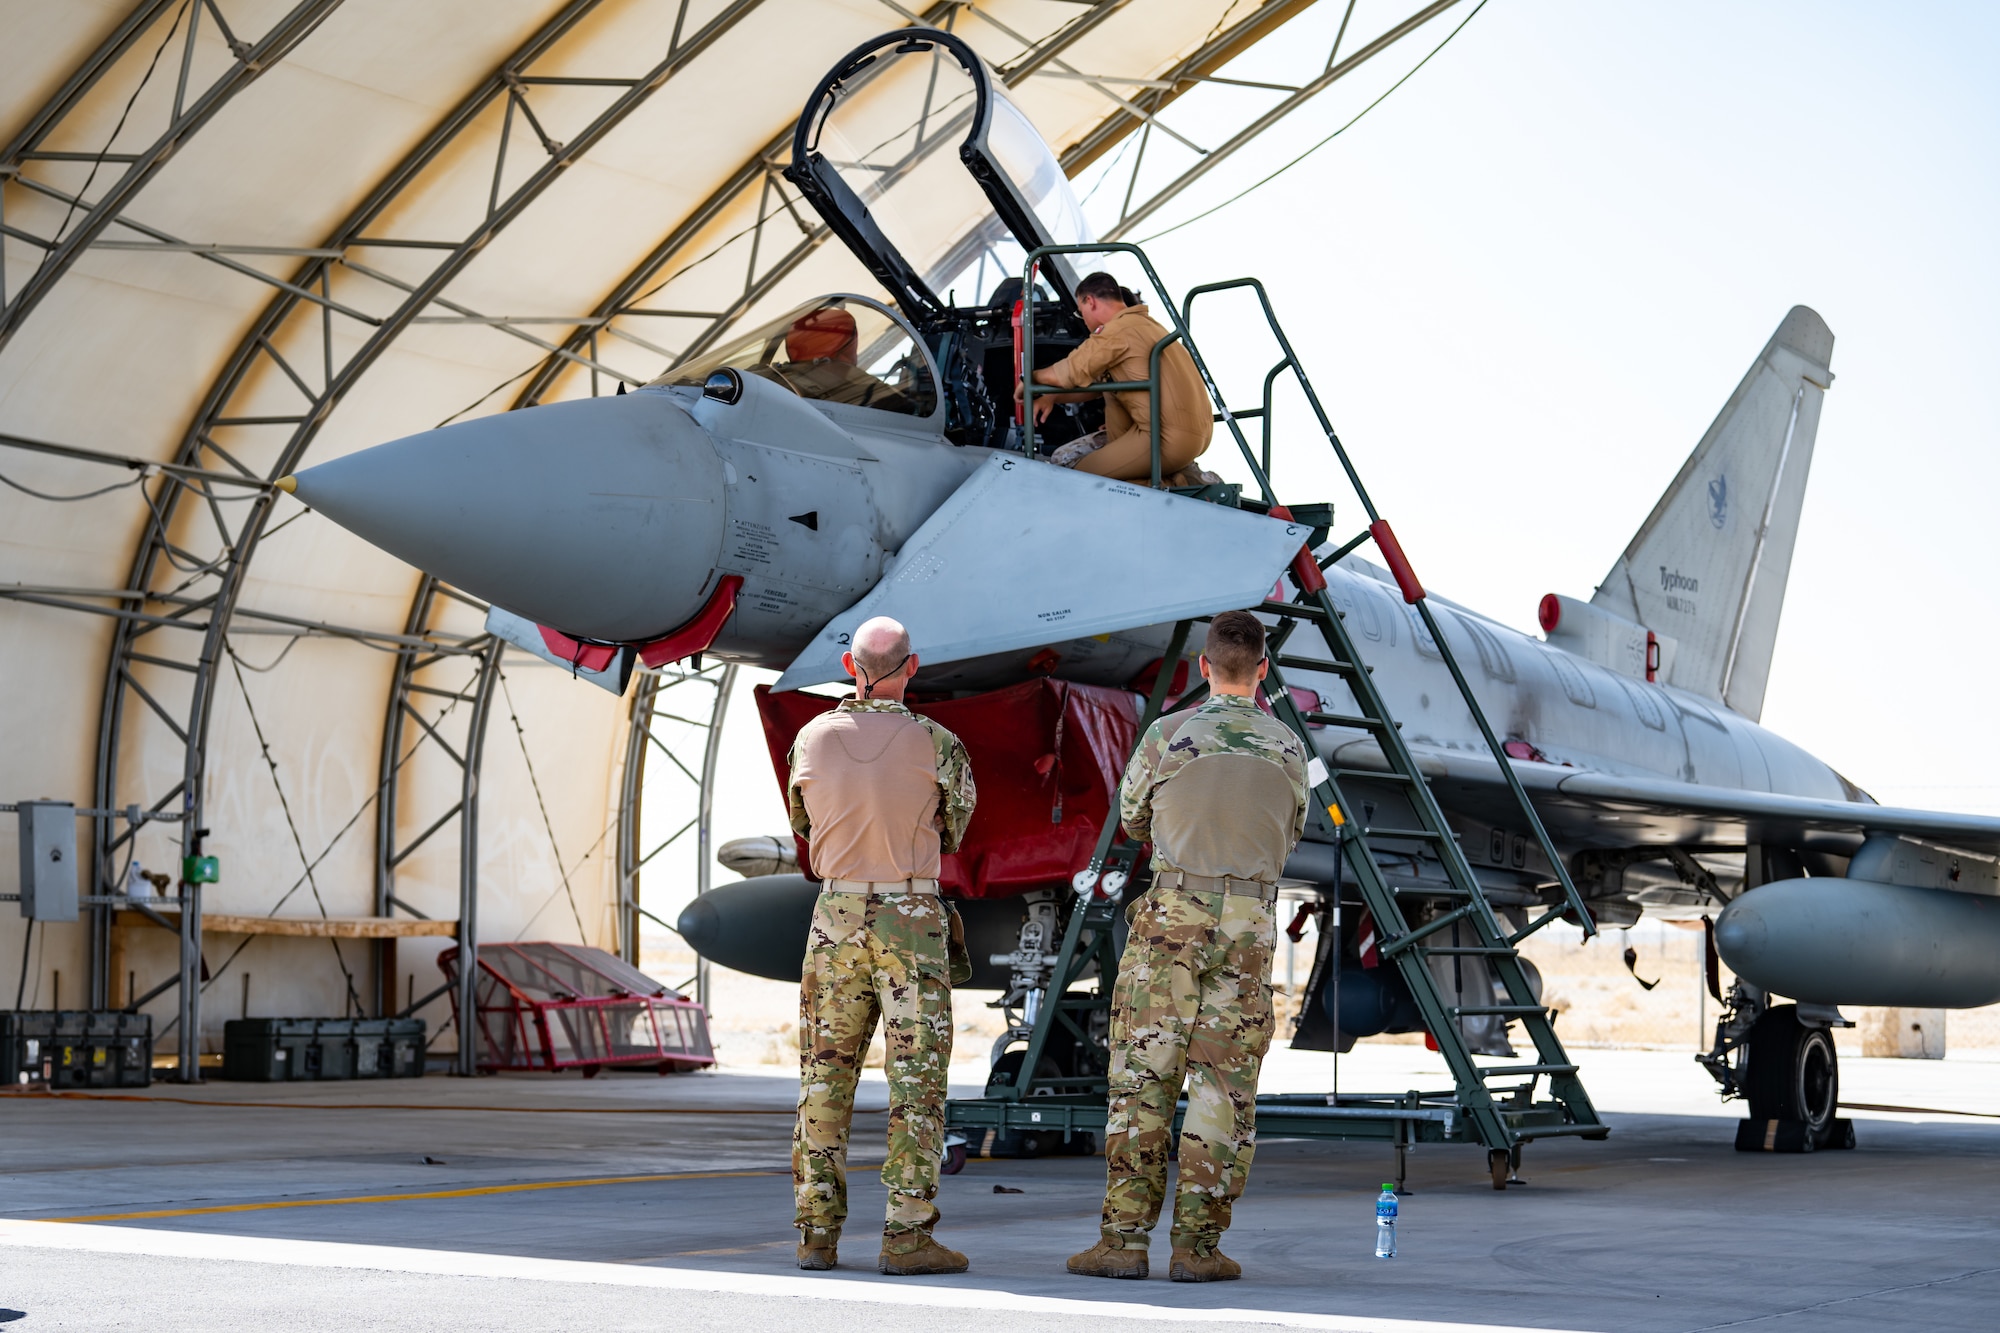 U.S. Air Force service members assigned to the 386th Air Expeditionary Wing take a close look at an Italian Air Force Eurofighter Typhoon at Ali Al Salem Air Base, Kuwait, Aug. 4, 2023. Our Italian Air Force counterparts opened their doors to all of the coalition partners here for this unique educational opportunity, increasing the interoperability of our forces and enhancing our ability to project decisive combat power together across the theater. (U.S. Air Force photo by Staff Sgt. Kevin Long)